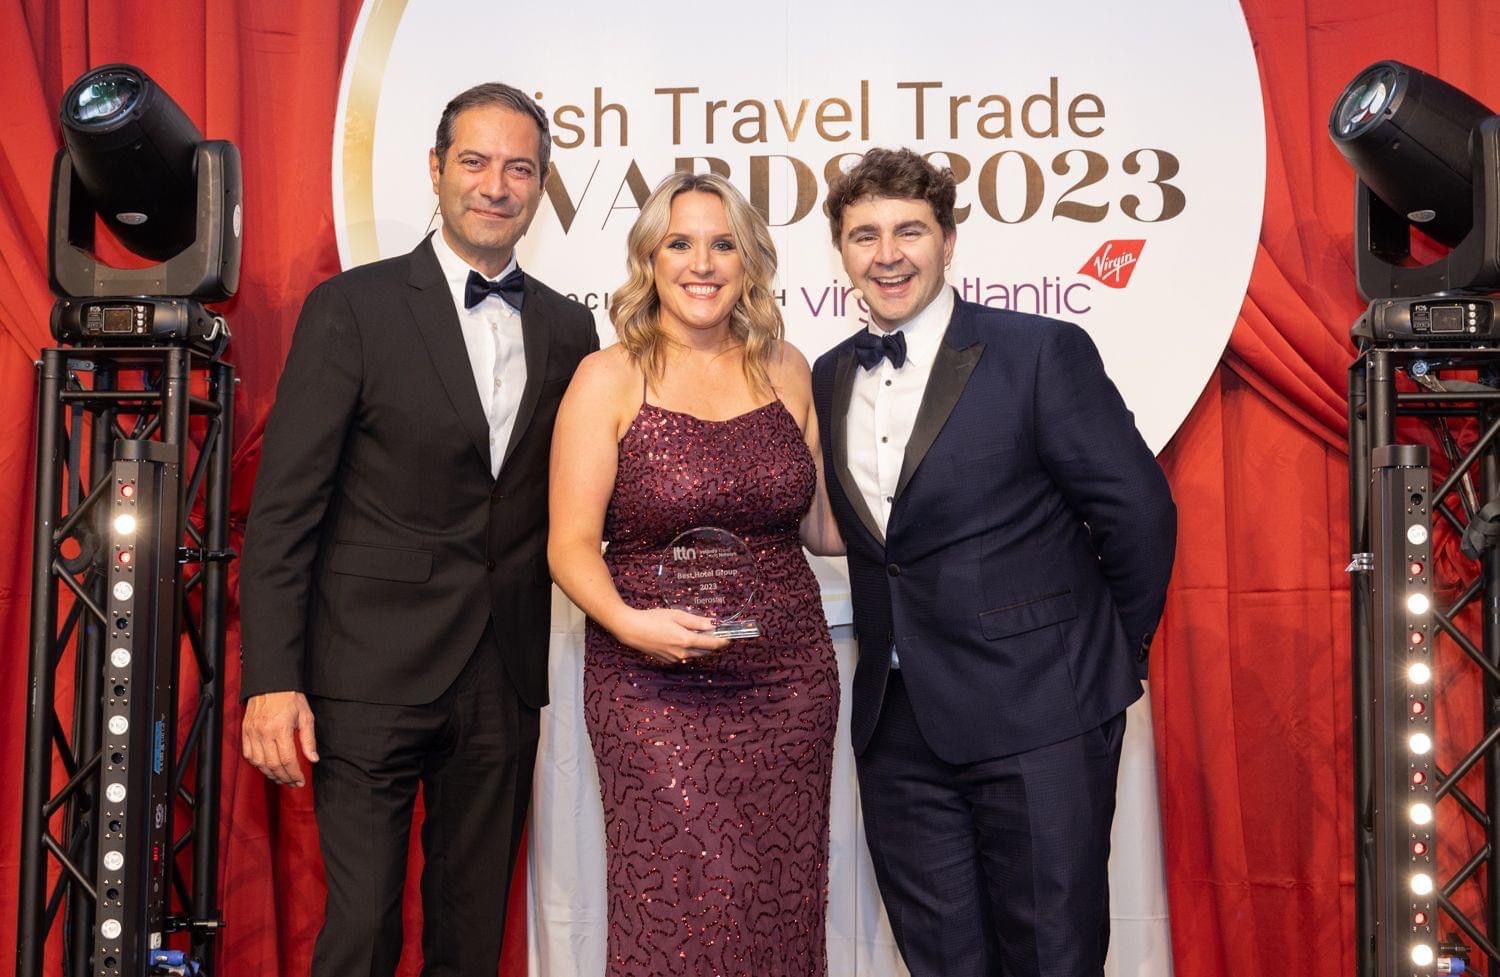 Iberostar Hotels & Resorts named “Best Hotel Group 2023” at the ITTN Awards